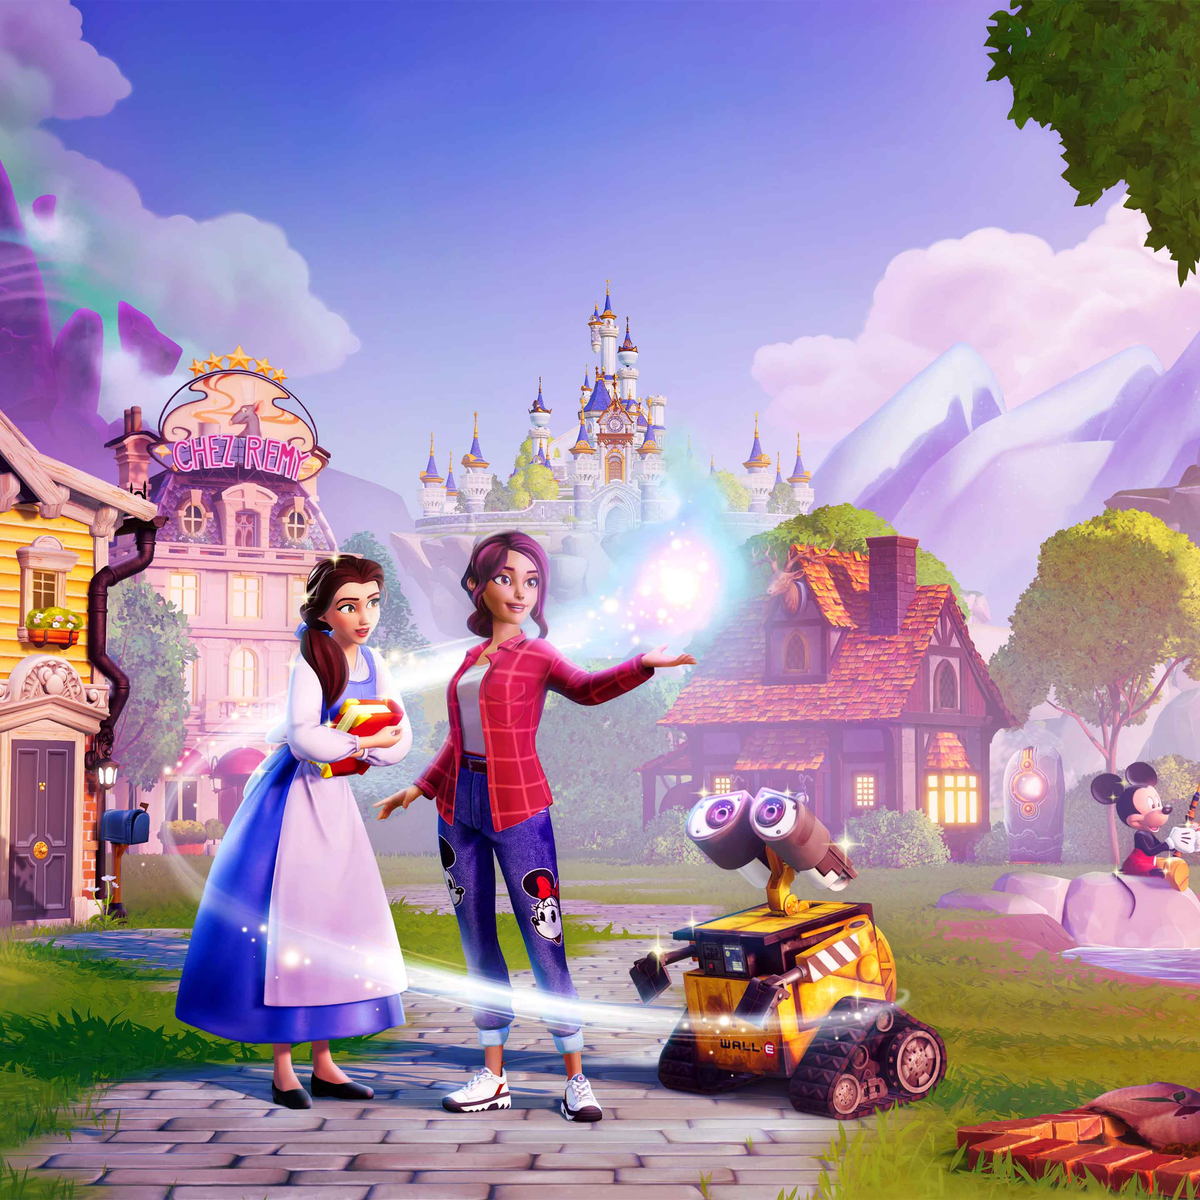 Disney Dreamlight Valley is a life-sim adventure game coming to